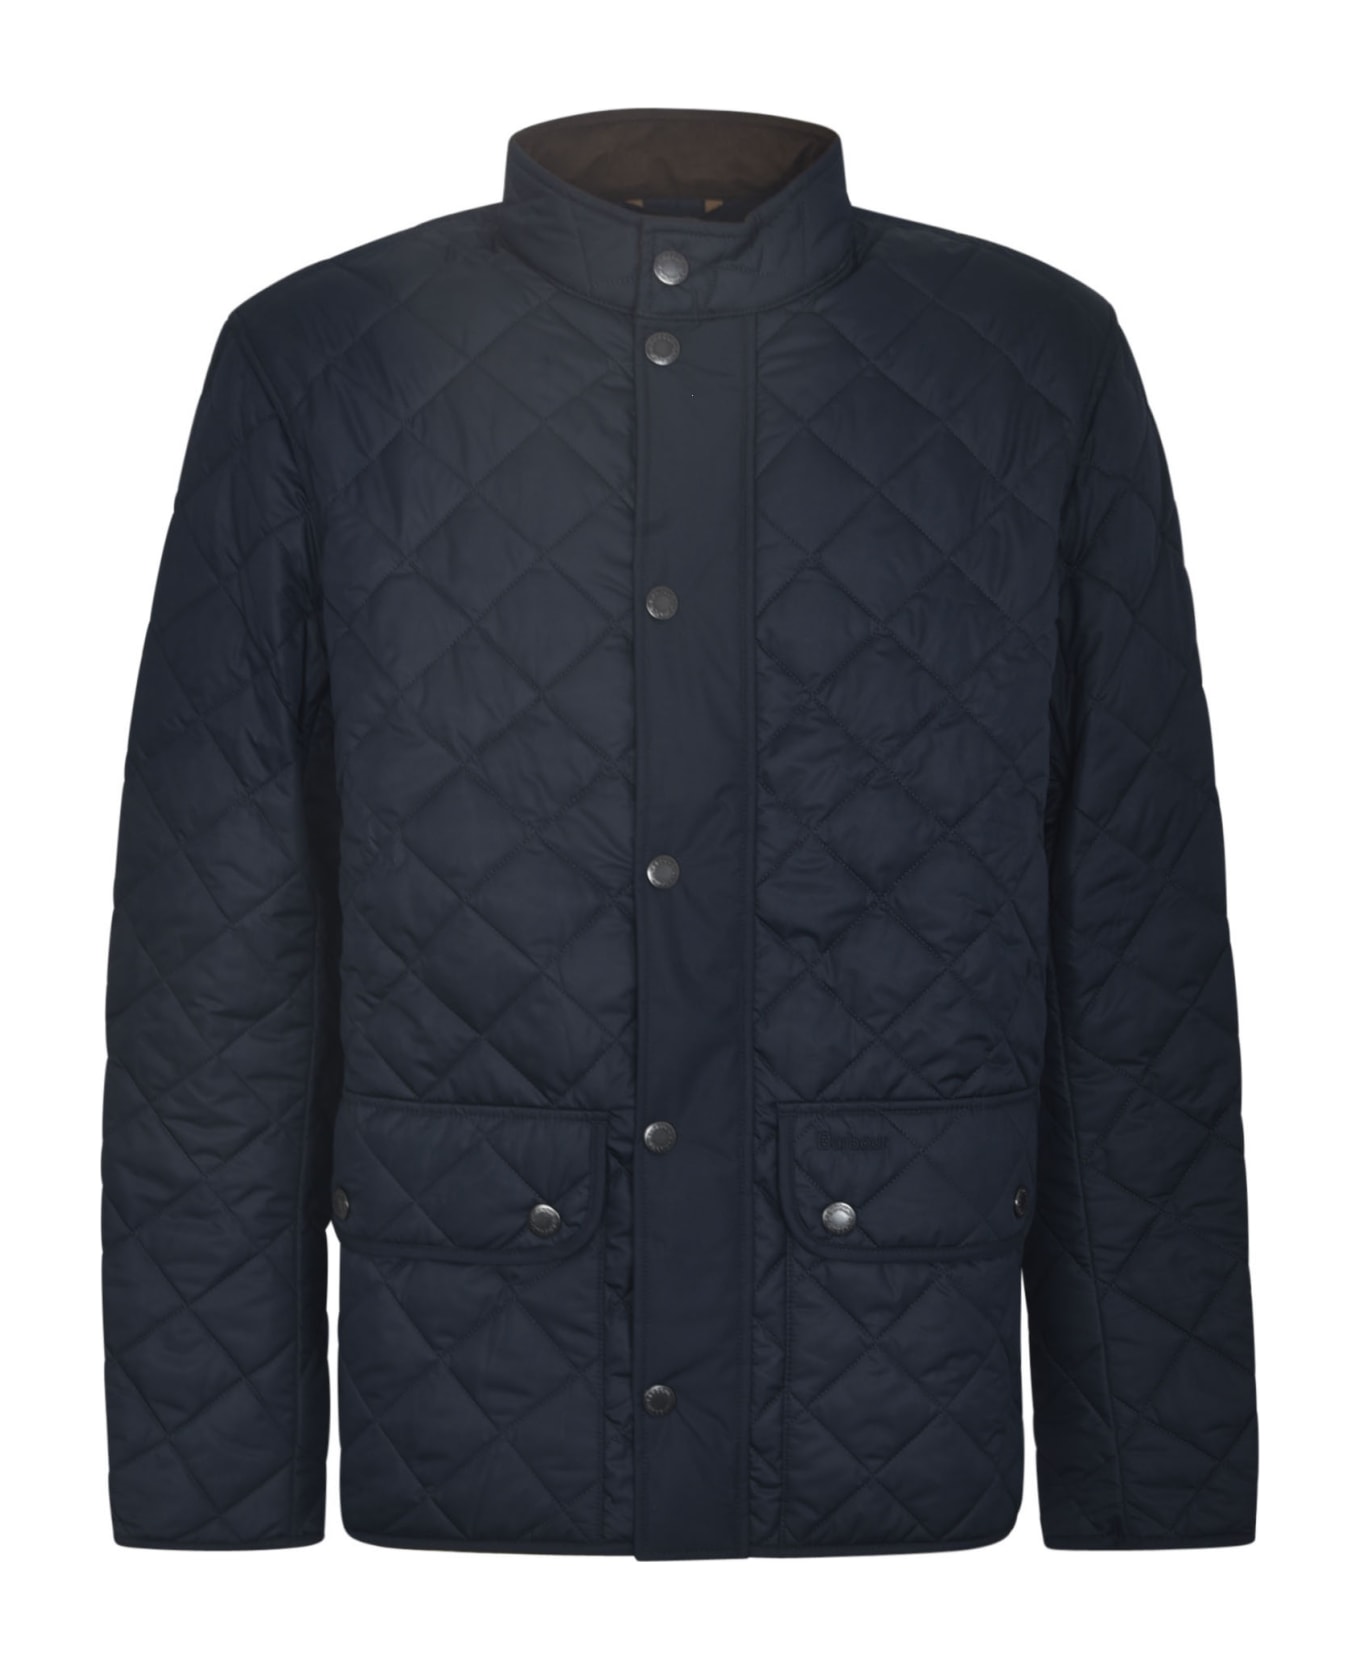 Barbour Quilted Buttoned Jacket - Navy ジャケット